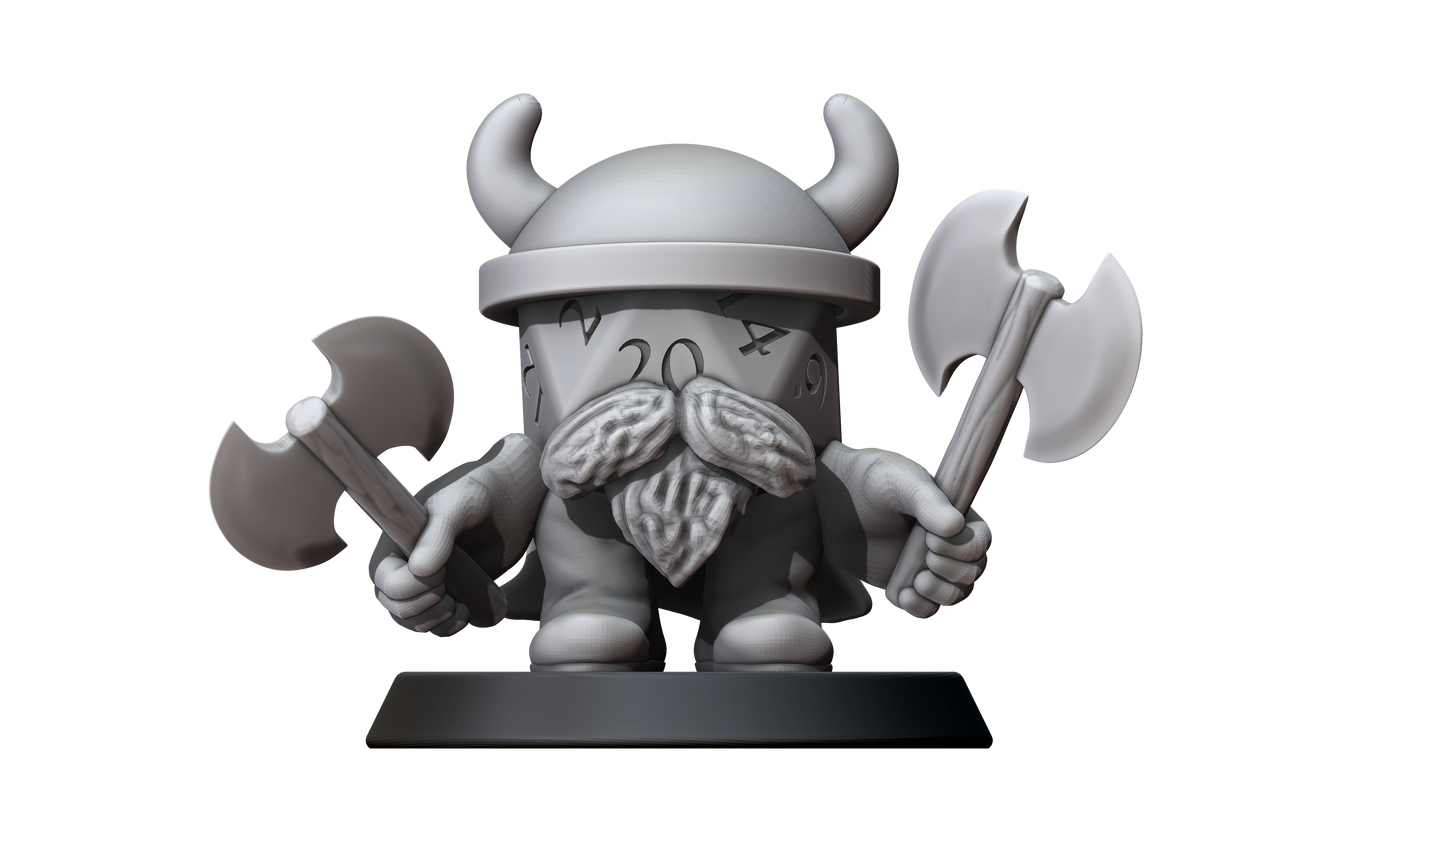 D20 Barbarian Construct Hero (Small) by Minitaurus for Tabletop Games, Dioramas and Statues, Available in 15mm, 28mm, 32mm, 32mm heroic, 54mm and 75mm Statue Scale